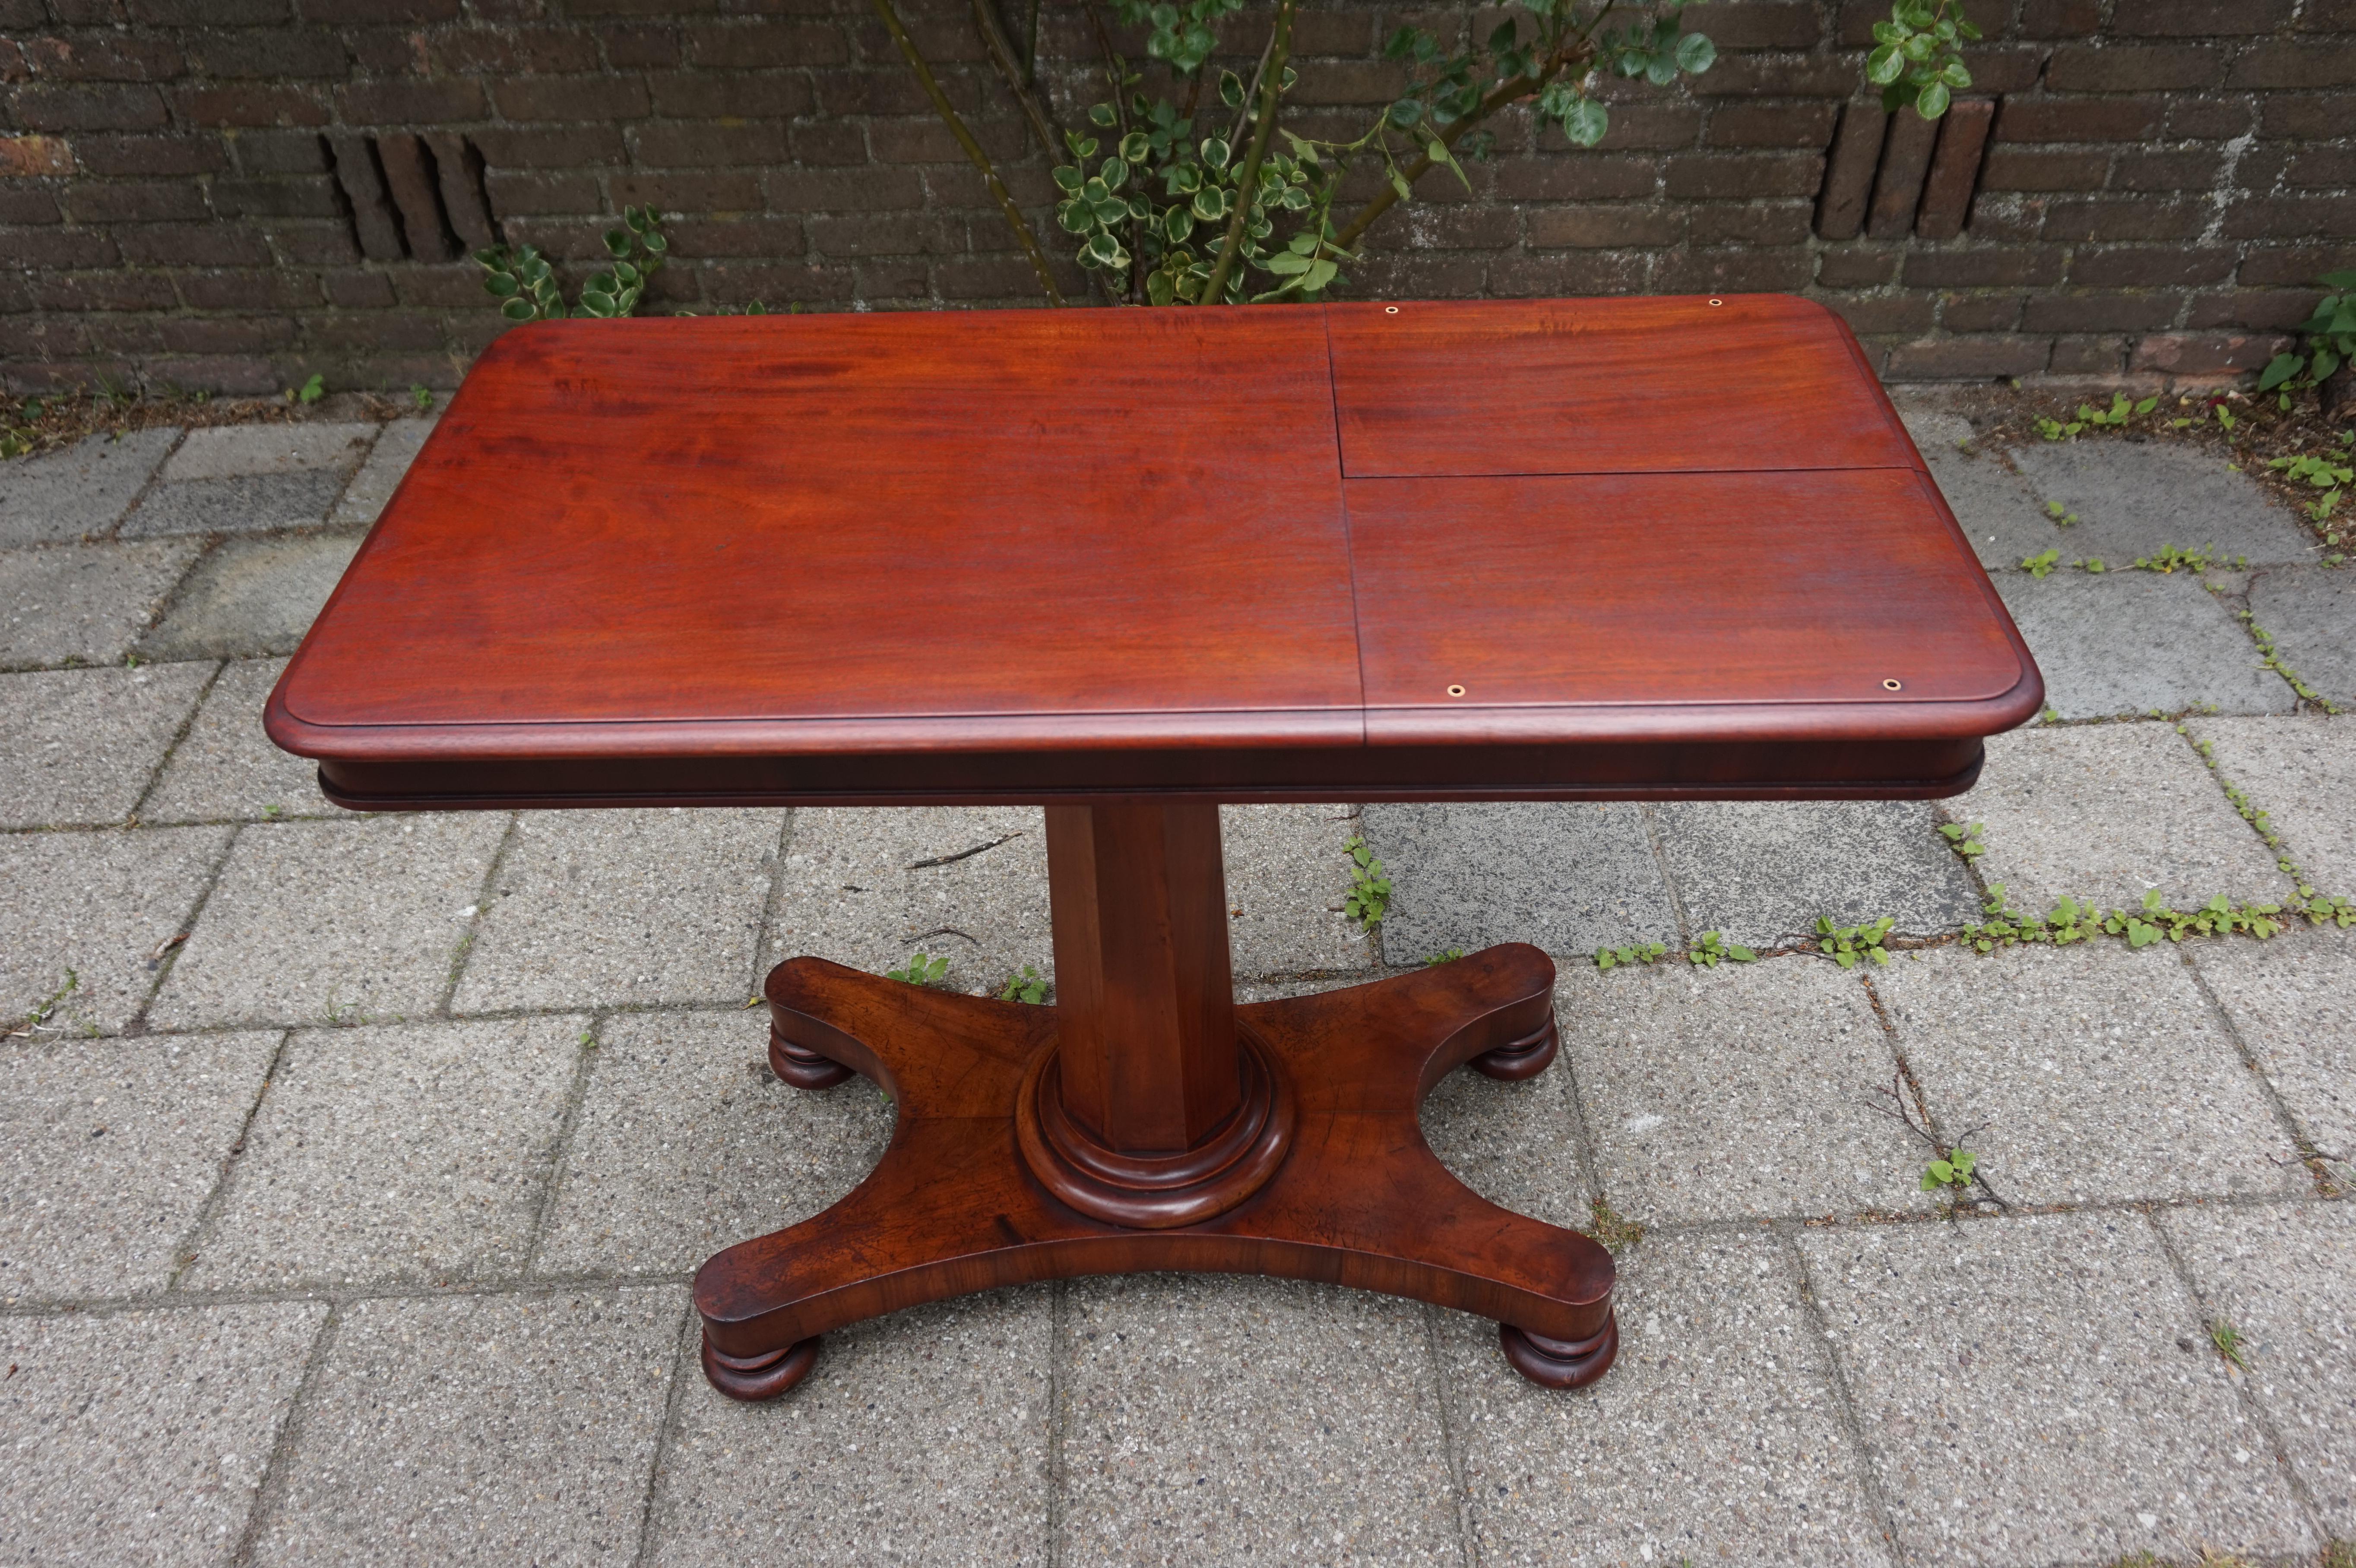 Extraordinary and multi purpose antique table.

This amazing quality and excellent condition table must have been made by one of Britain's top furniture makers, but we cannot find a maker's mark. This mahogany table would only have been made for the